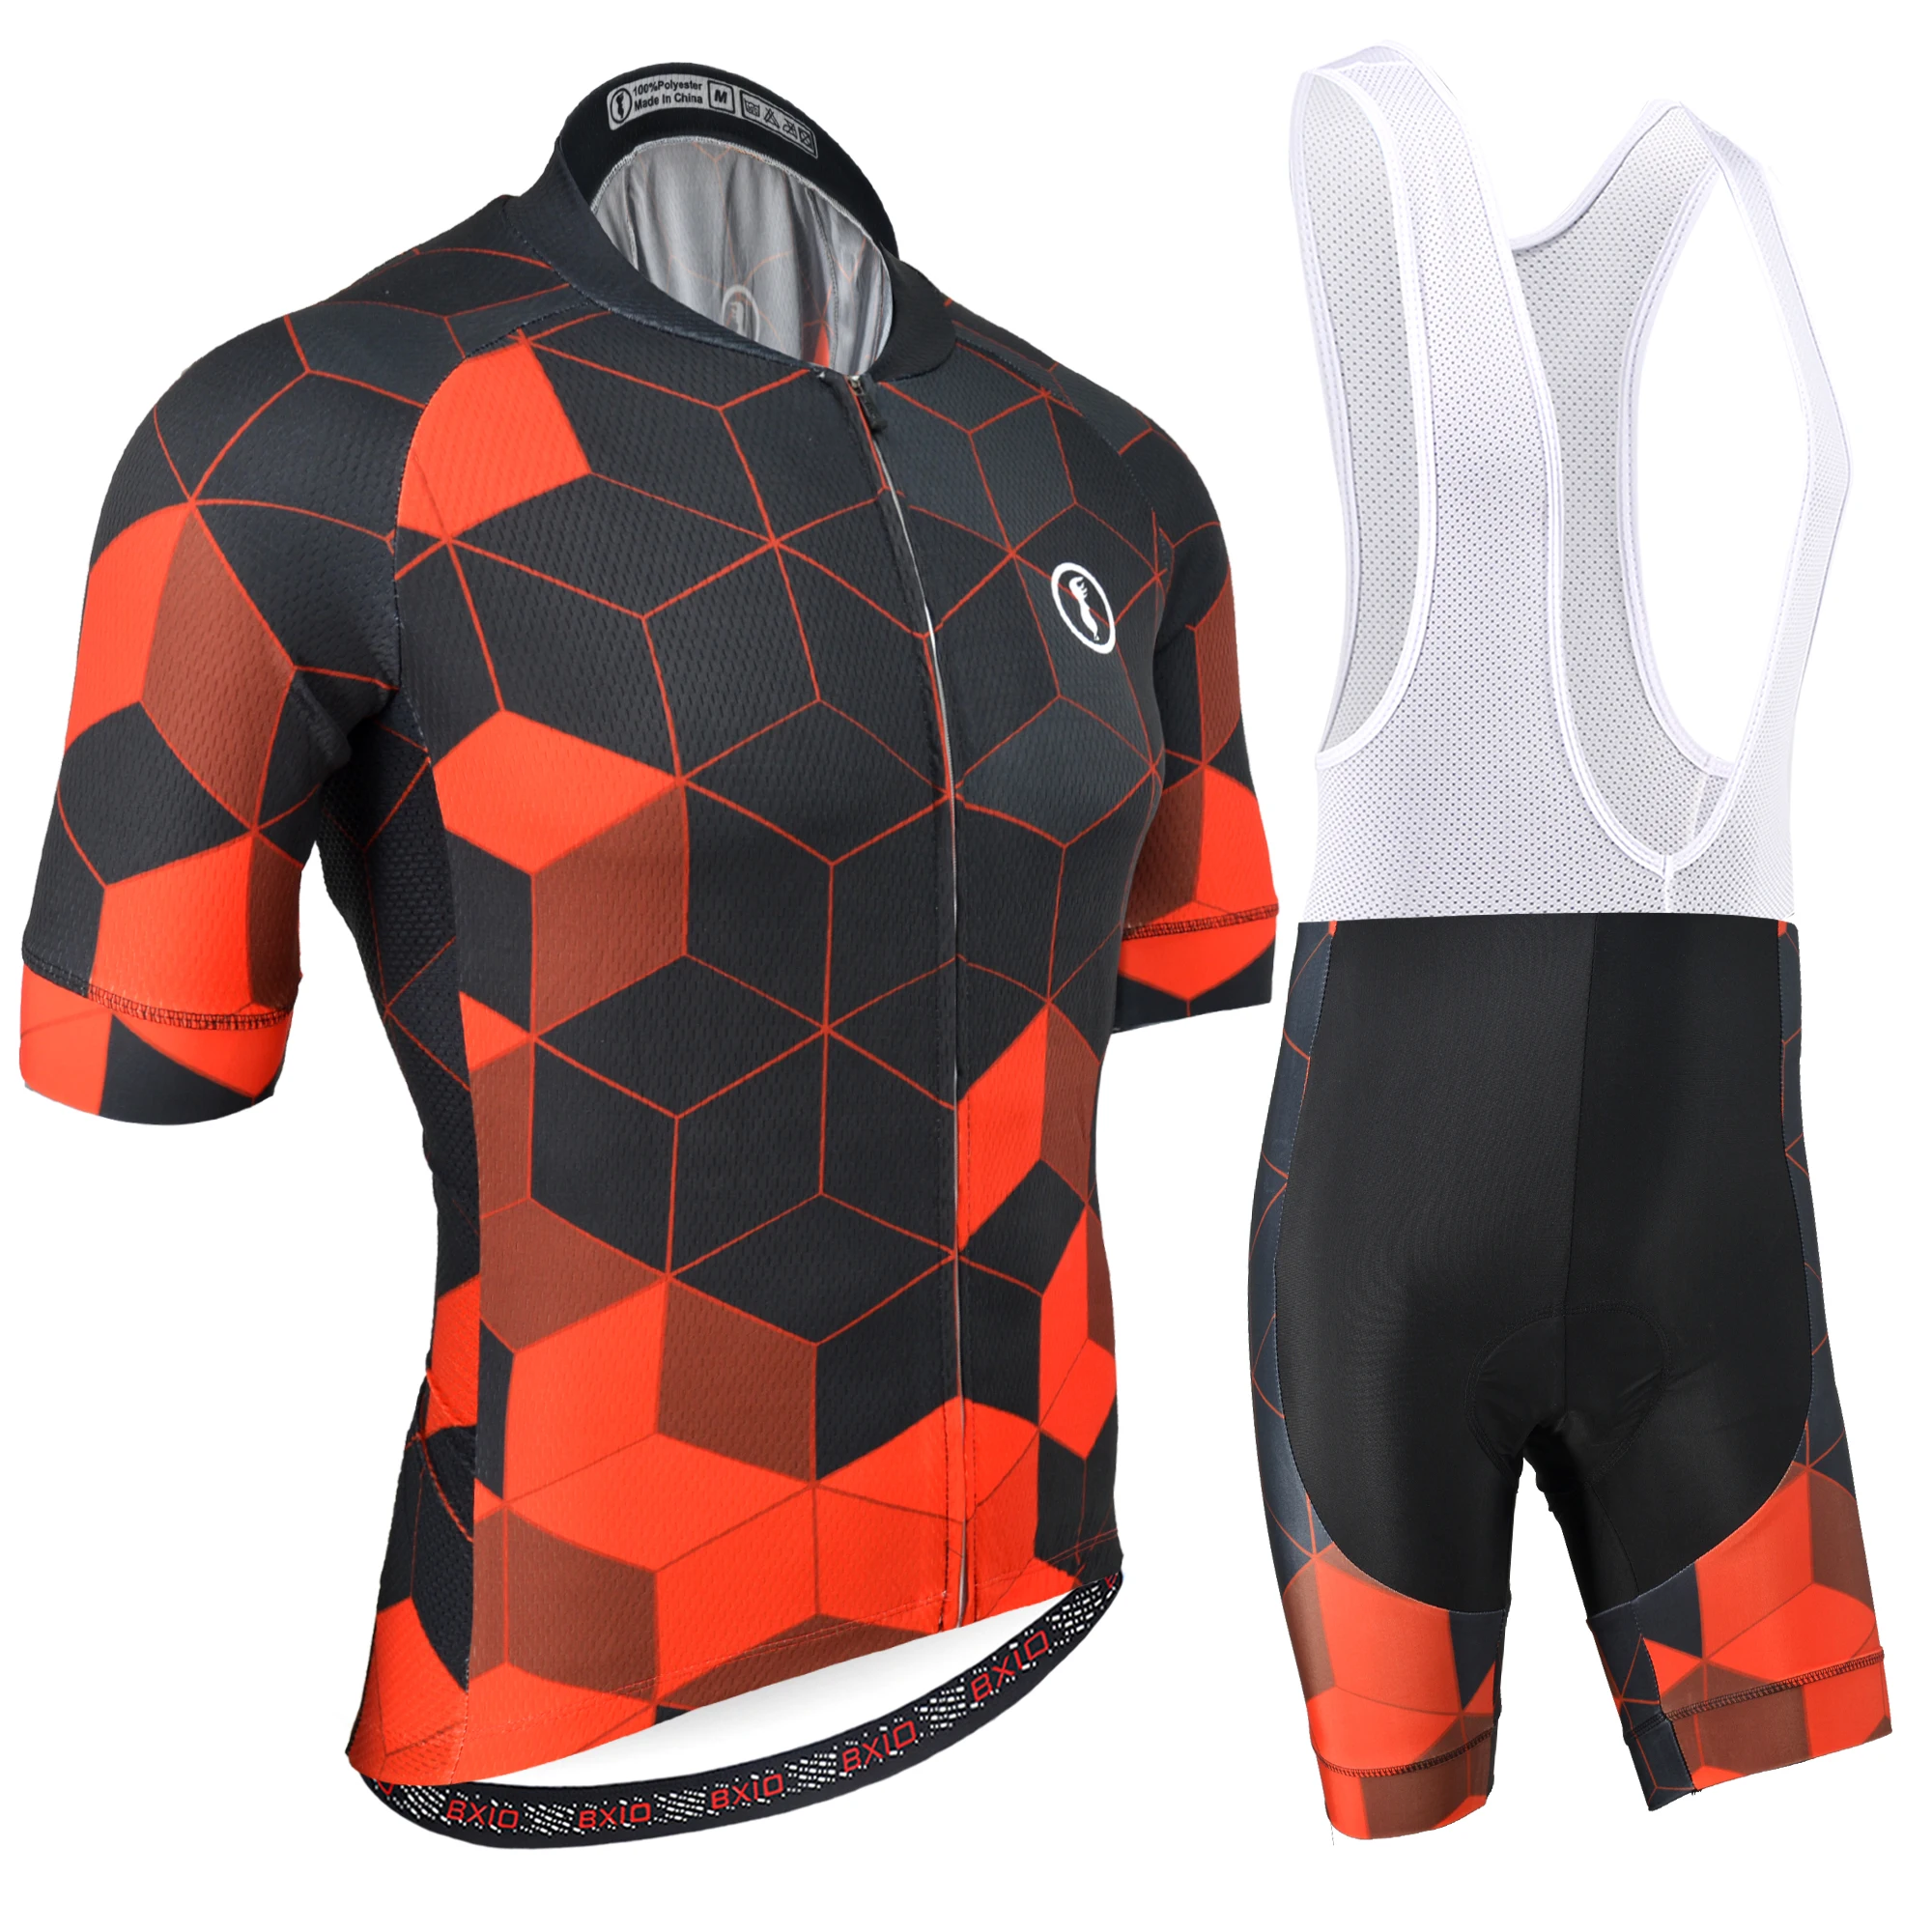 

BXIO Men's Short Sleeve and Bib Short Trousers Cycling Suits for Summer Cycling, Outdoor and MTB